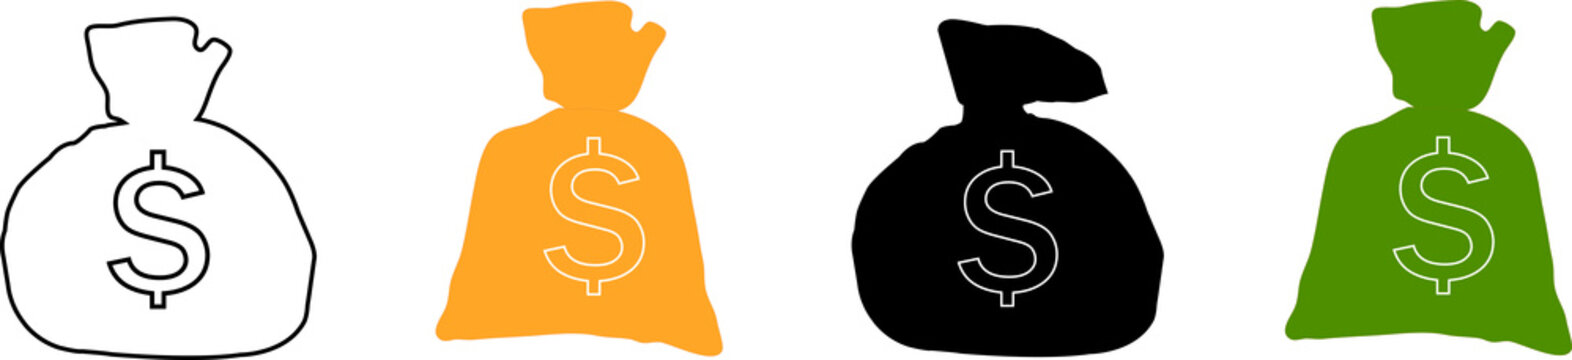 Illustration Of Four Different Money Bags With Some Dollar Signs On A White Background.